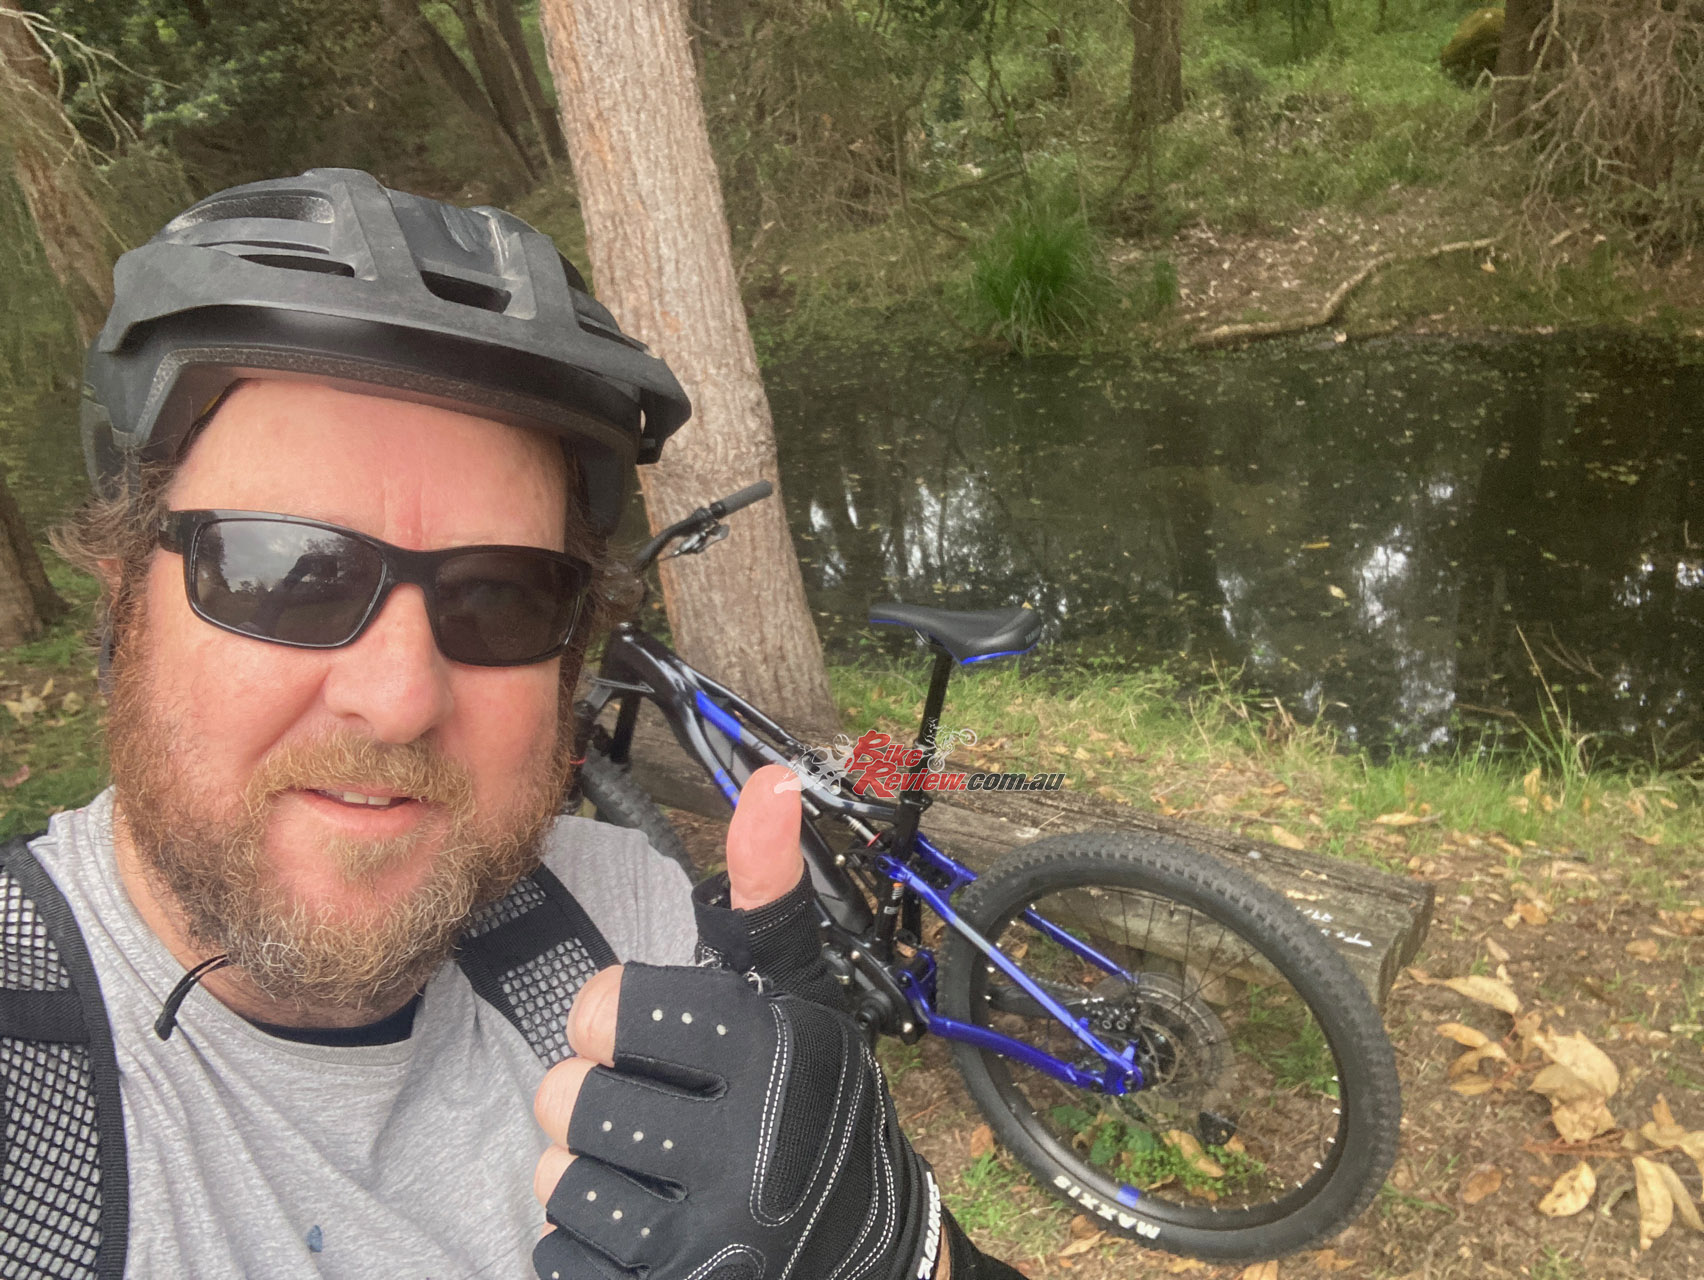 Jeff has clocked up around 230km so far on his BikeReview YDX-Moro 07 and reckons he has been smiling every second on it.